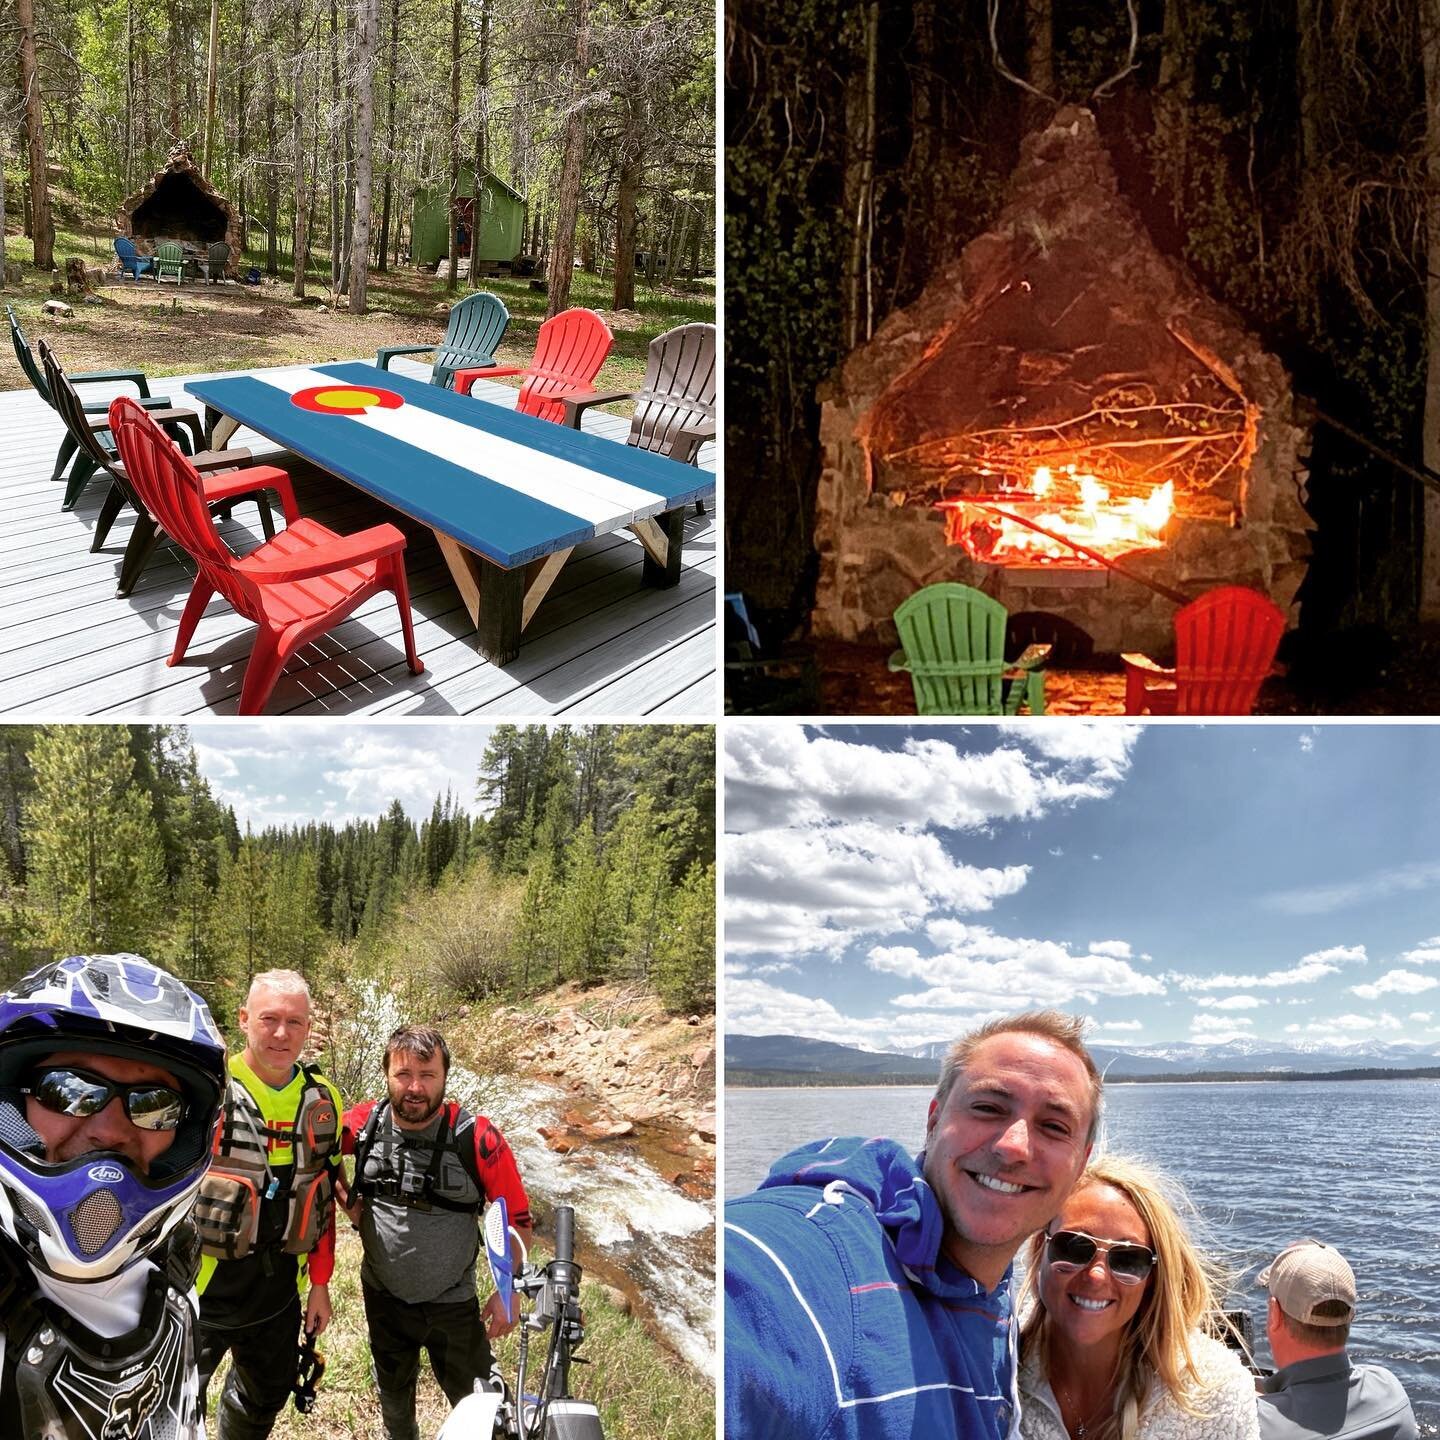 Great weekend, boating, building tables, fires, dirt biking, and awesome friends! #visitleadvillecolorado